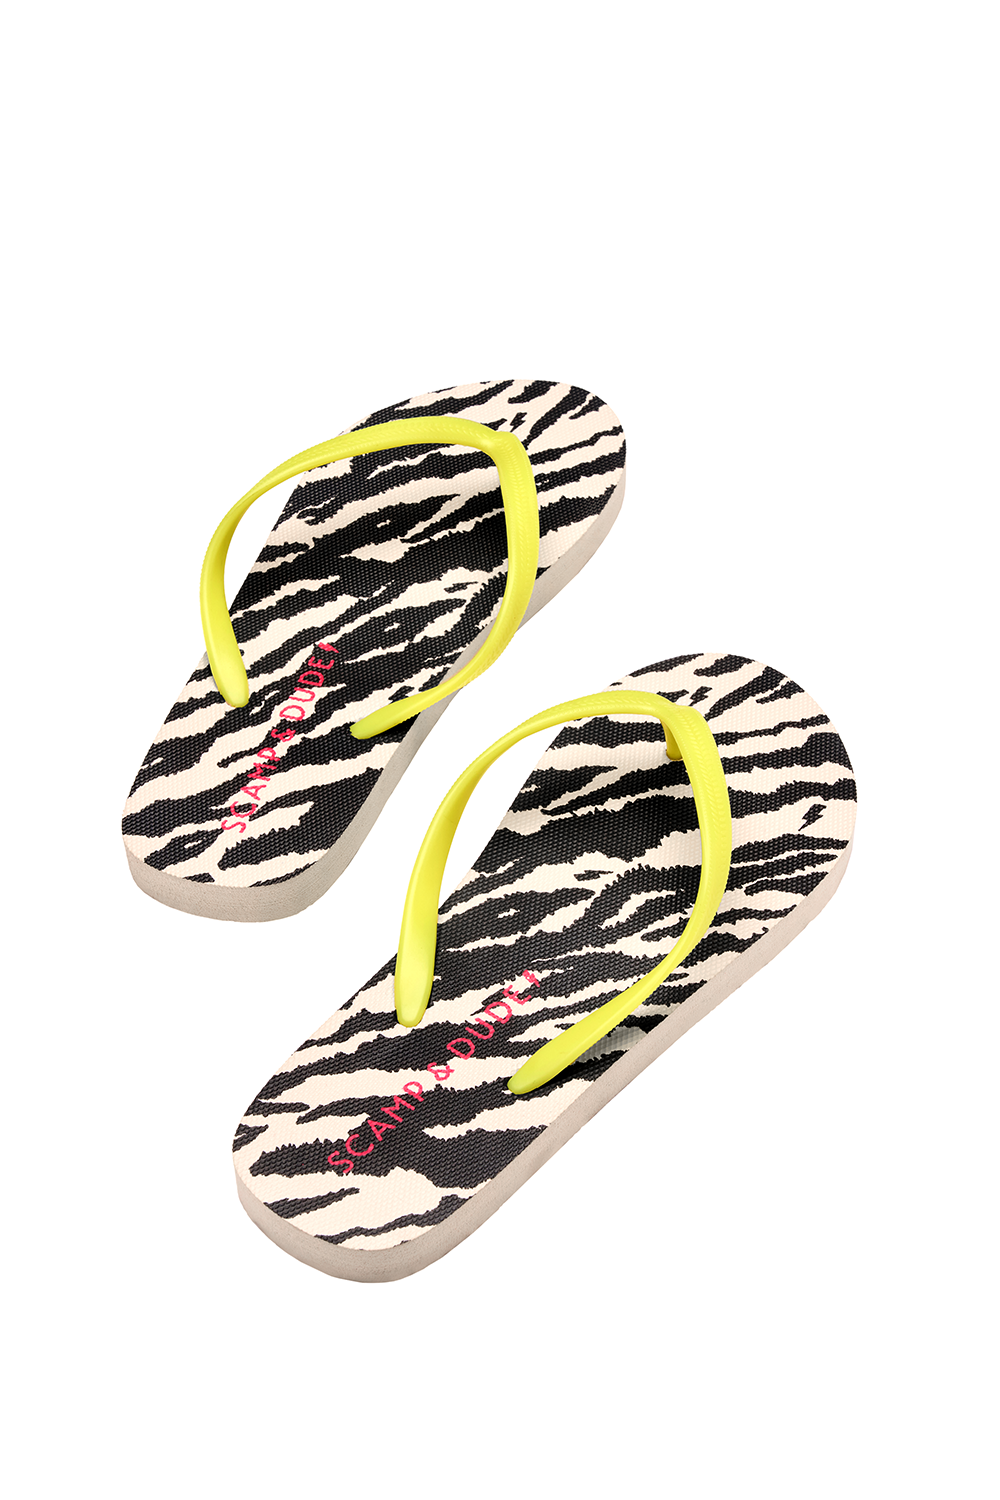 COMING SOON: Ivory with Black Shadow Tiger Flip Flops